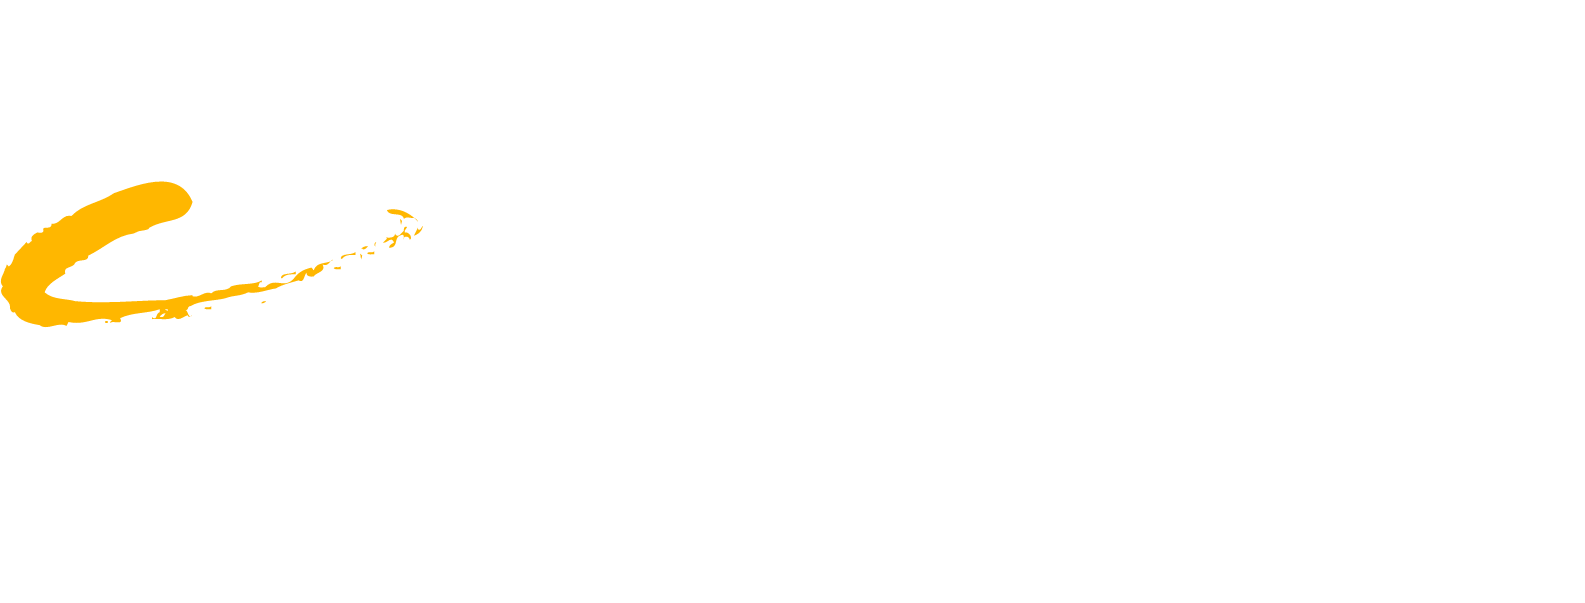 Compass Group logo in White